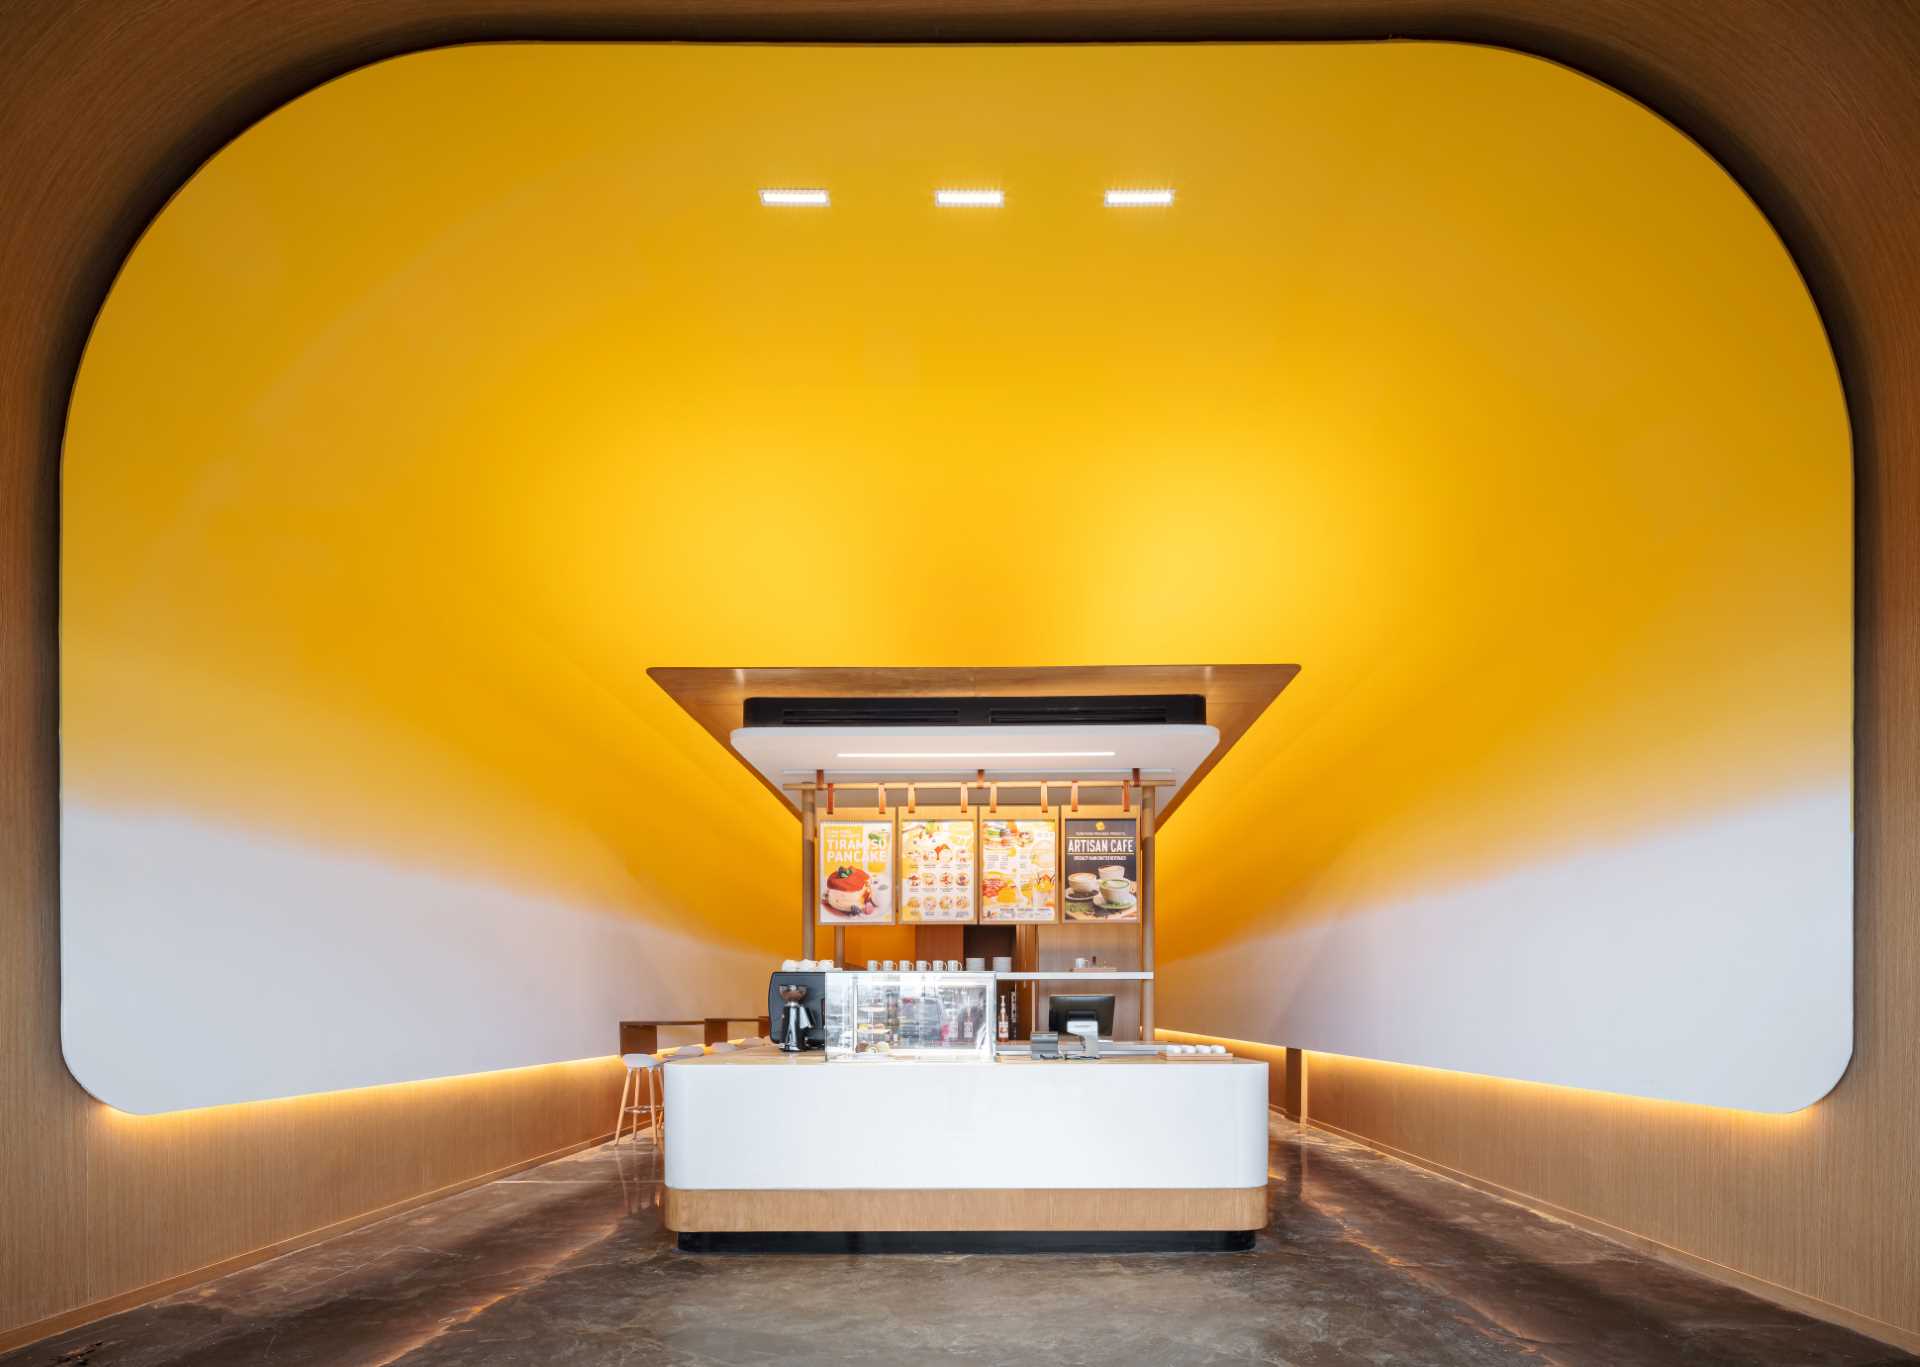 Visitors to this modern cafe are greeted by the soft curve and bright yellow of the high ceiling as it frames a modern temple-like structure.